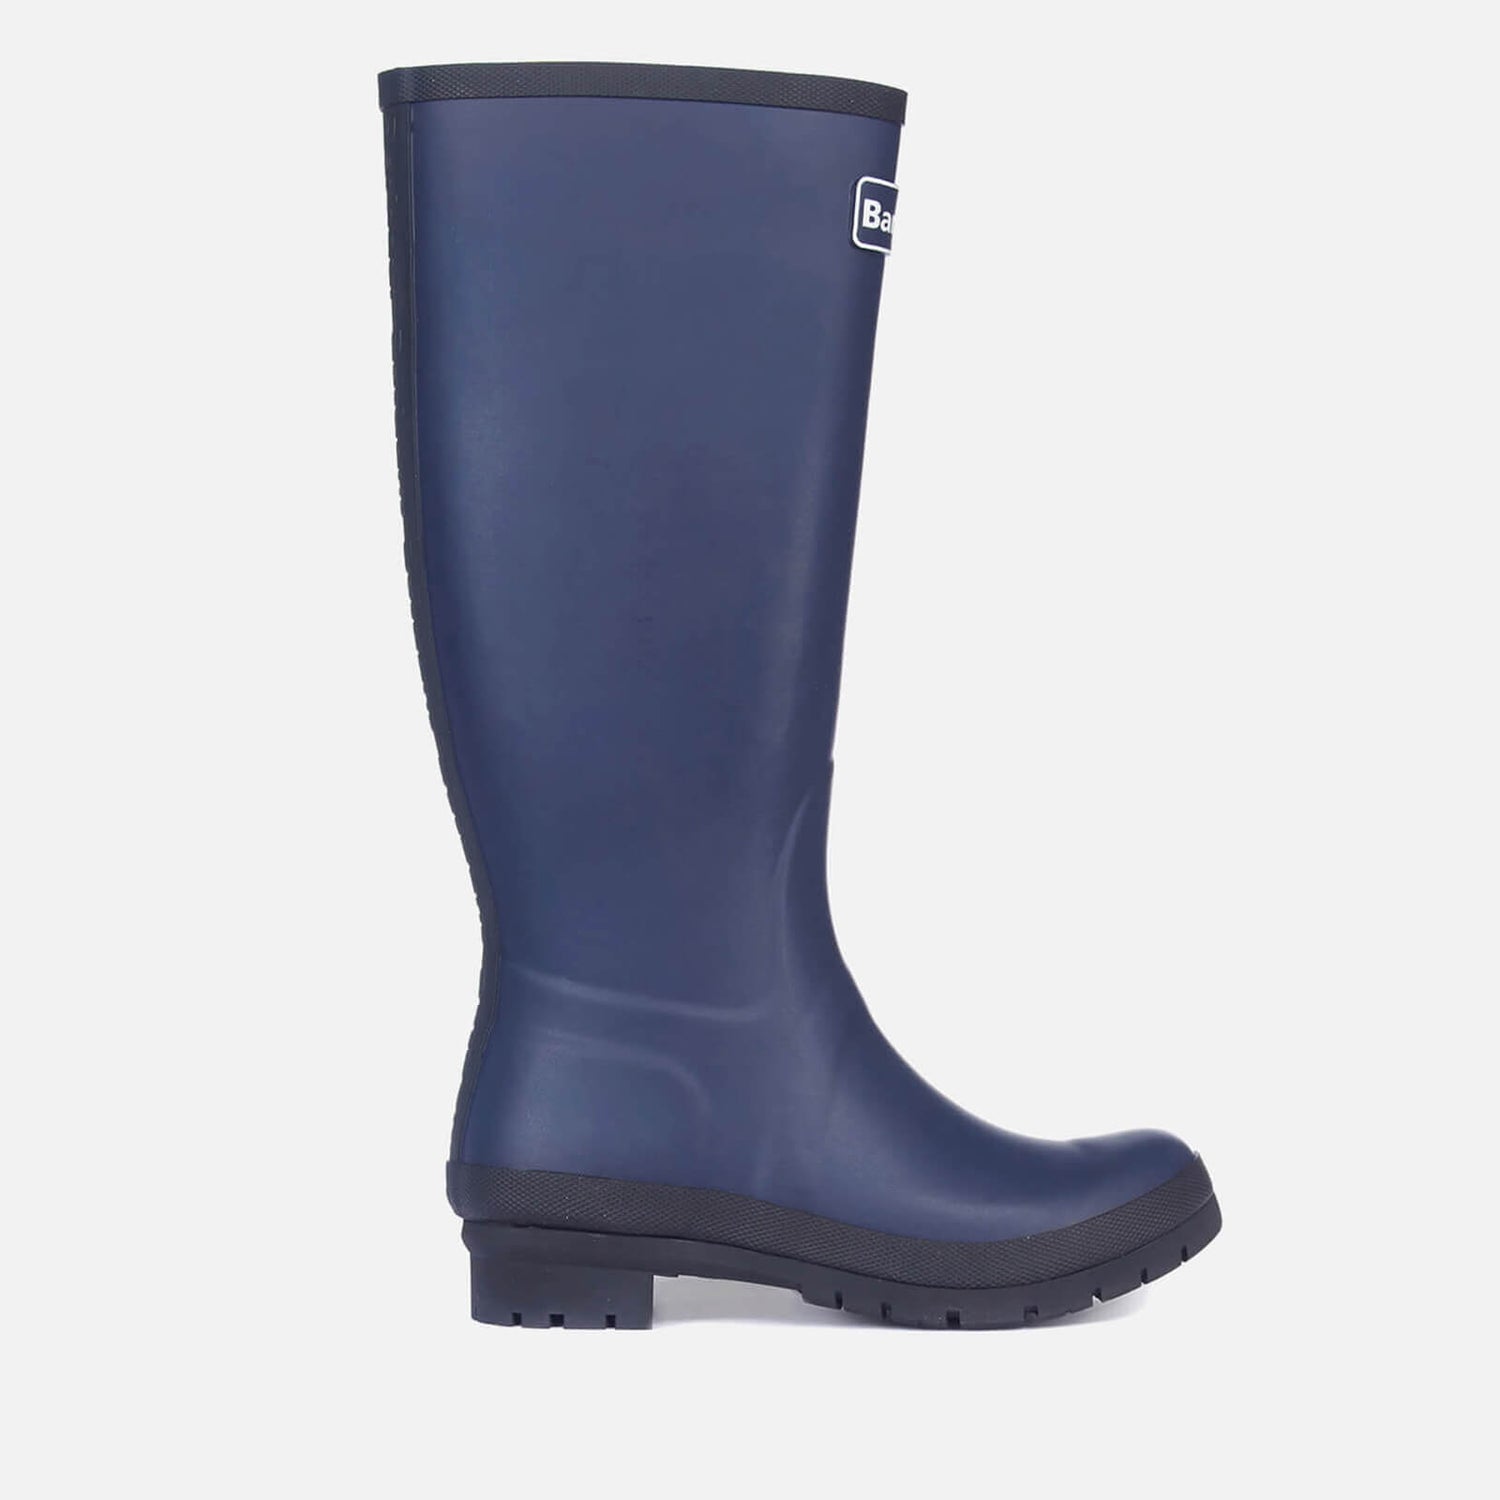 Barbour Women's Abbey Tall Wellies - Navy - UK 7